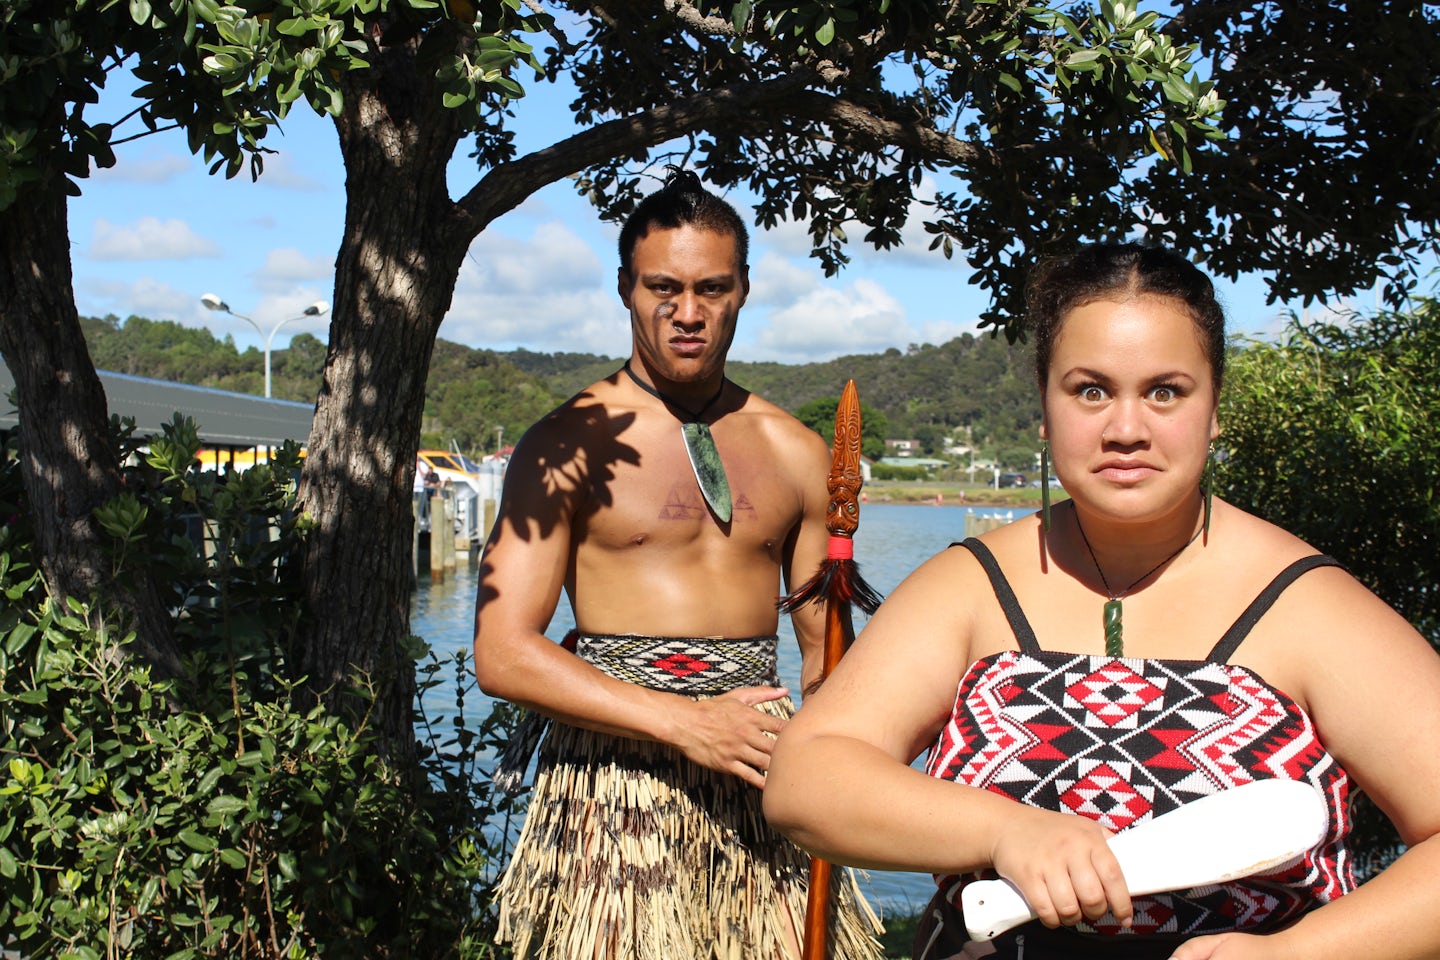 Shore excursion in the Bay of Islands. These are Maori natives who greeted